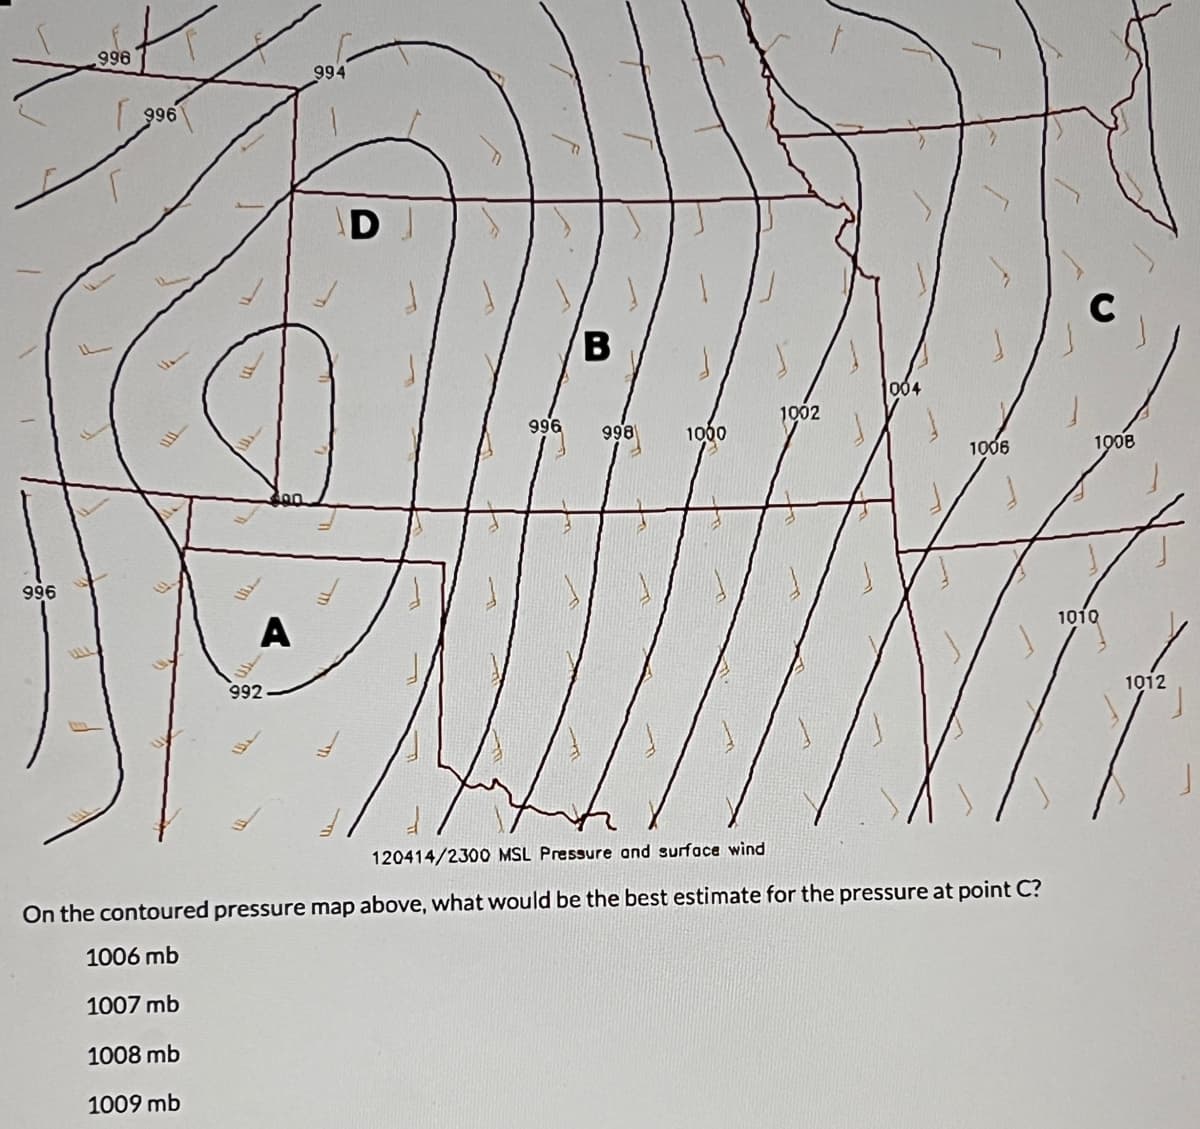 996
996
996
A
992
994
D
996
B
998
1000
1002
J
004
1006
120414/2300 MSL Pressure and surface wind
On the contoured pressure map above, what would be the best estimate for the pressure at point C?
1006 mb
1007 mb
1008 mb
1009 mb
C
1008
1010
1012